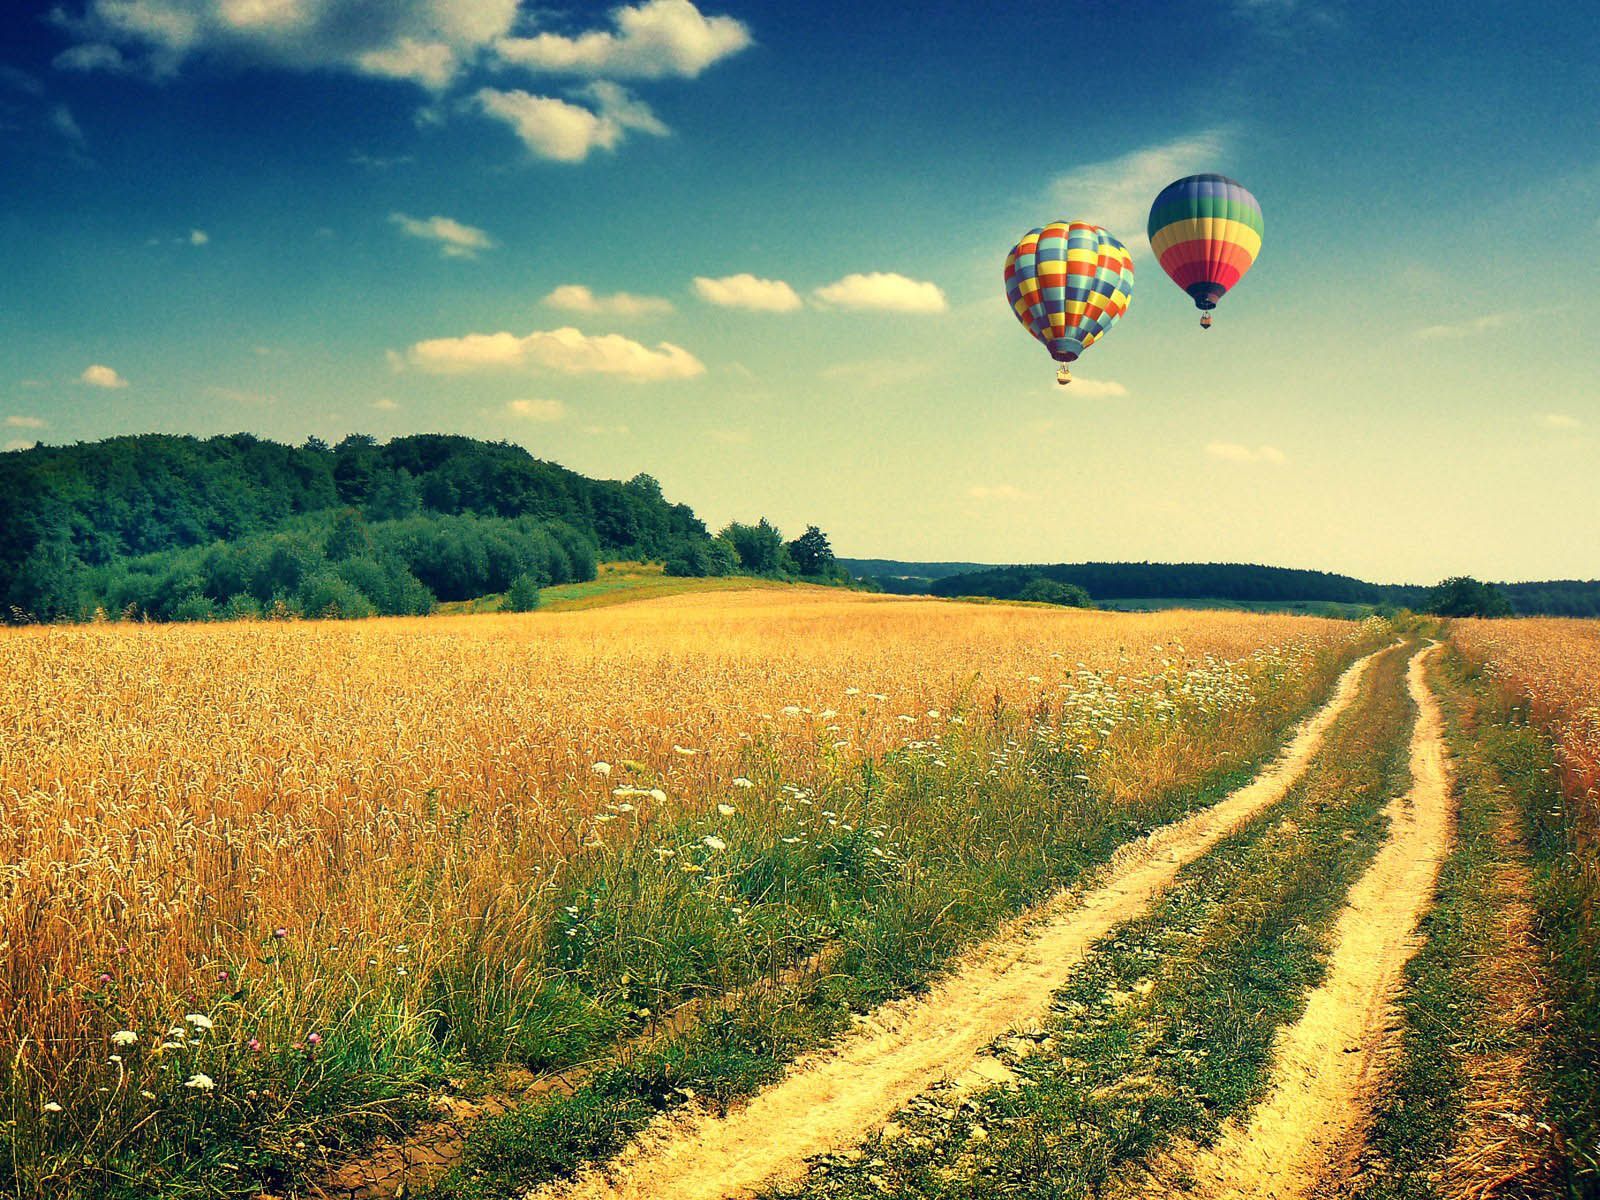 Two hot air balloons flying over a field - Hot air balloons